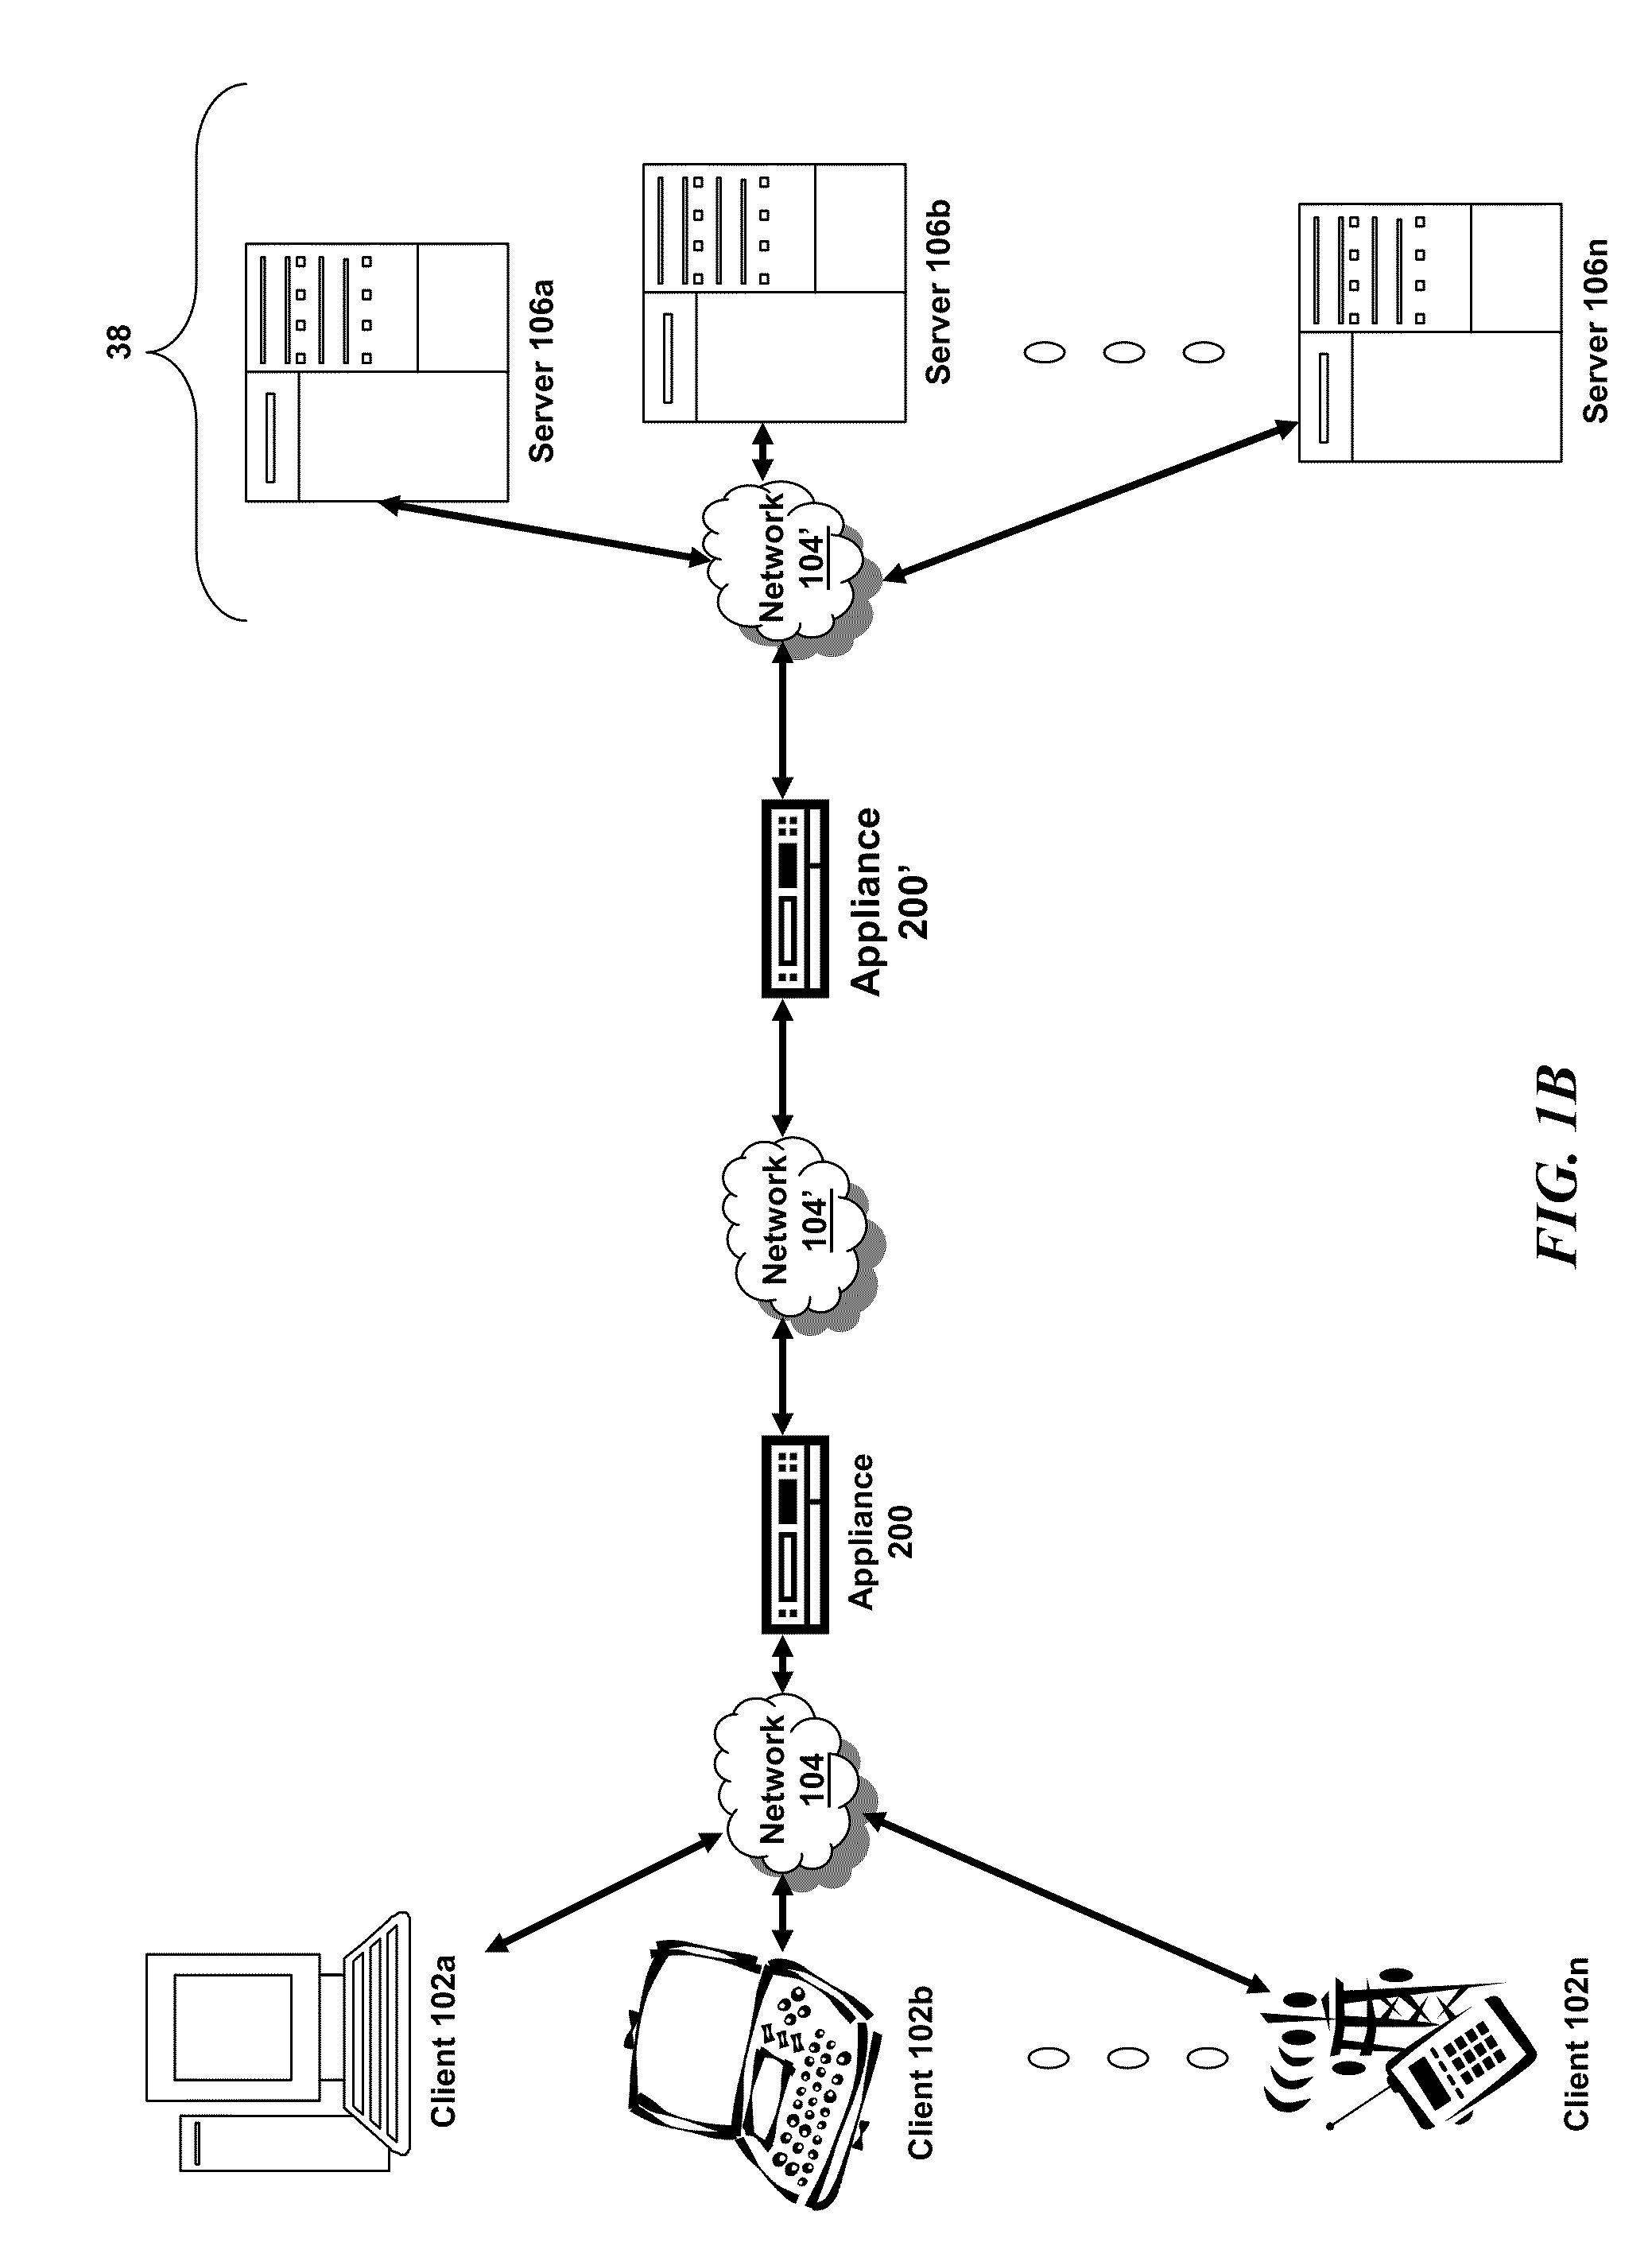 Systems and methods for aaa-traffic management information sharing across cores in a multi-core system